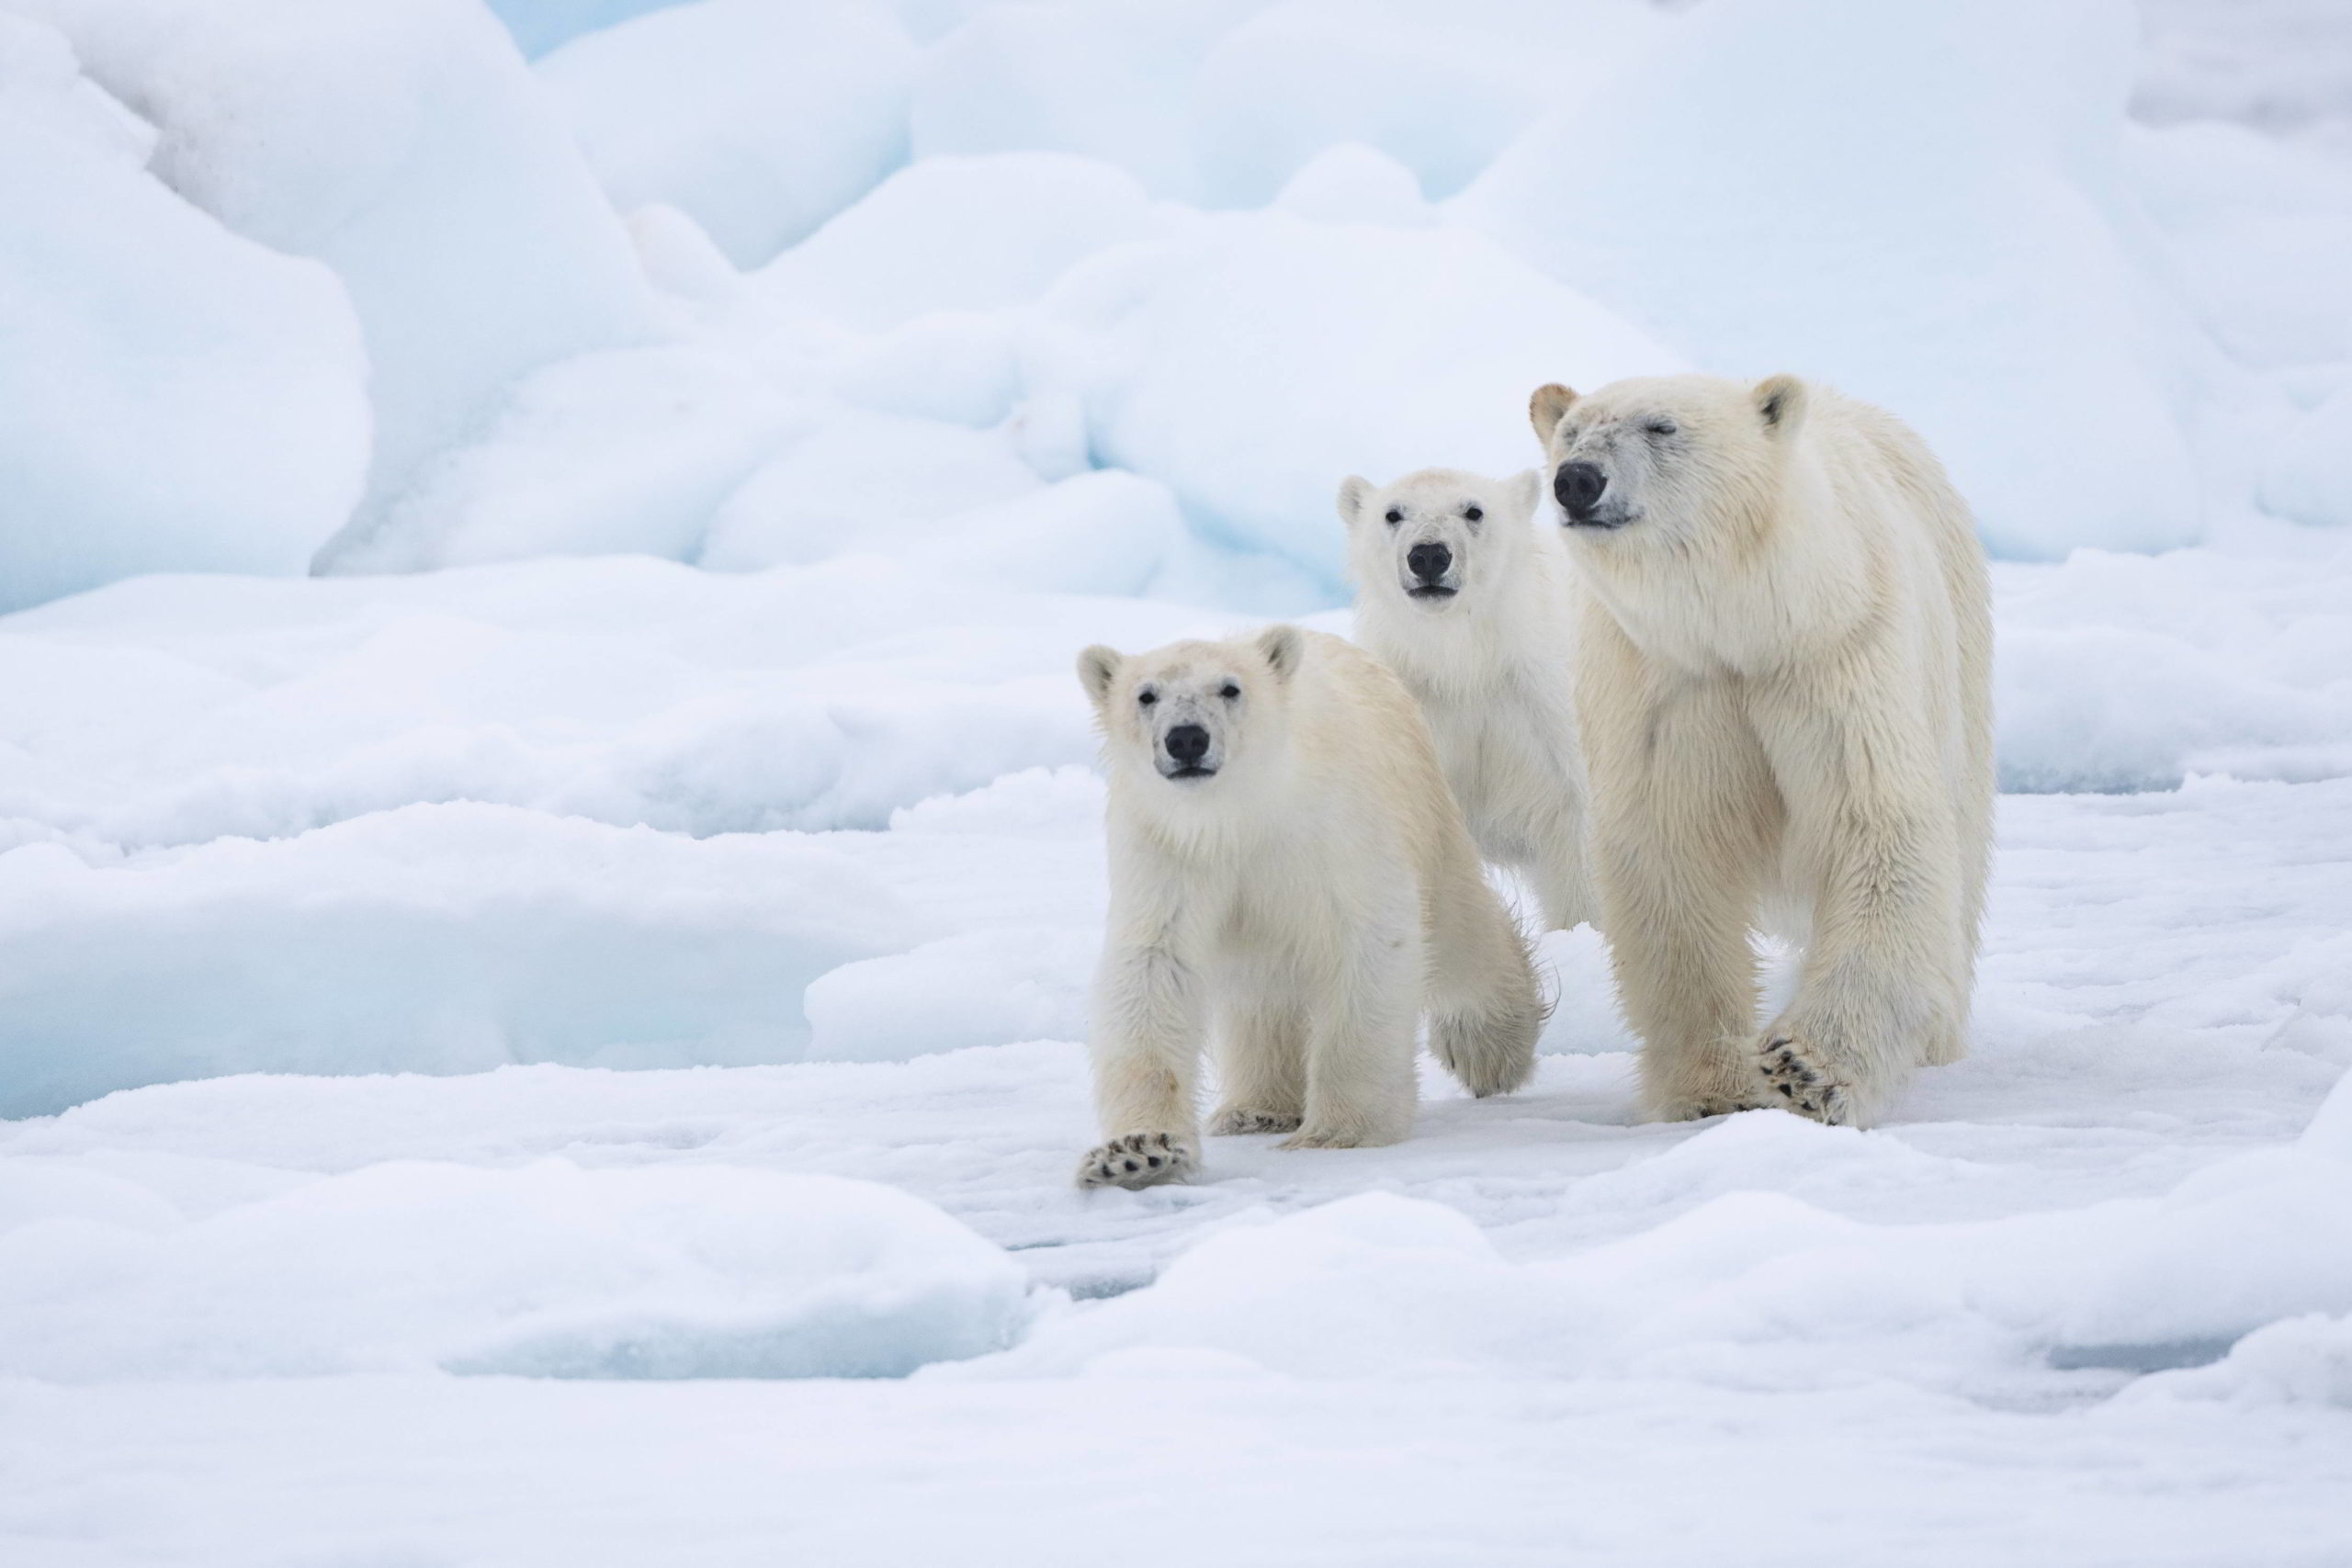 Polar bear mother and cubs walking on ice floe.